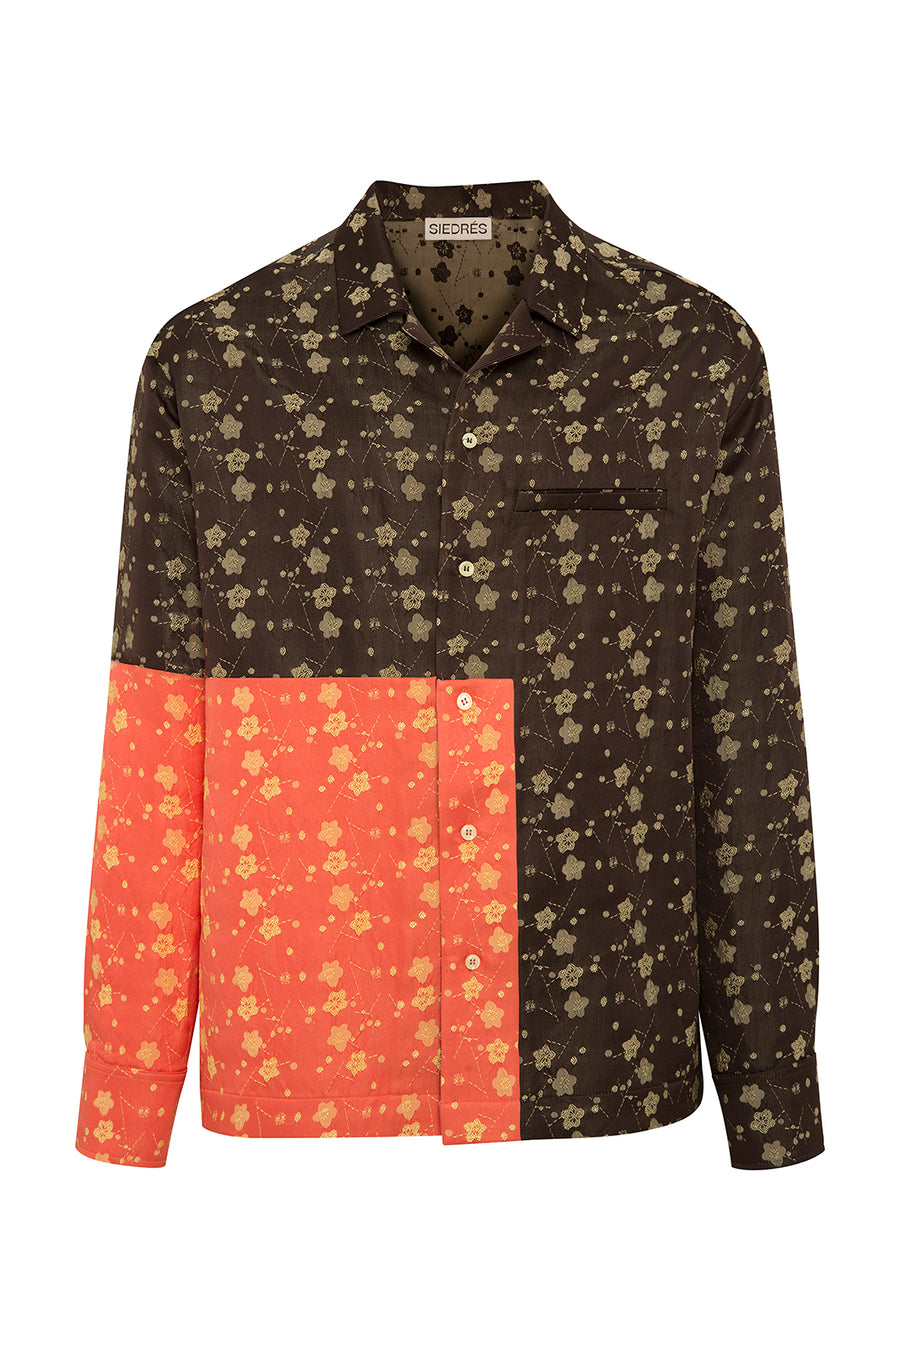 AIDEN - Resort collar shirt with contrast fabric